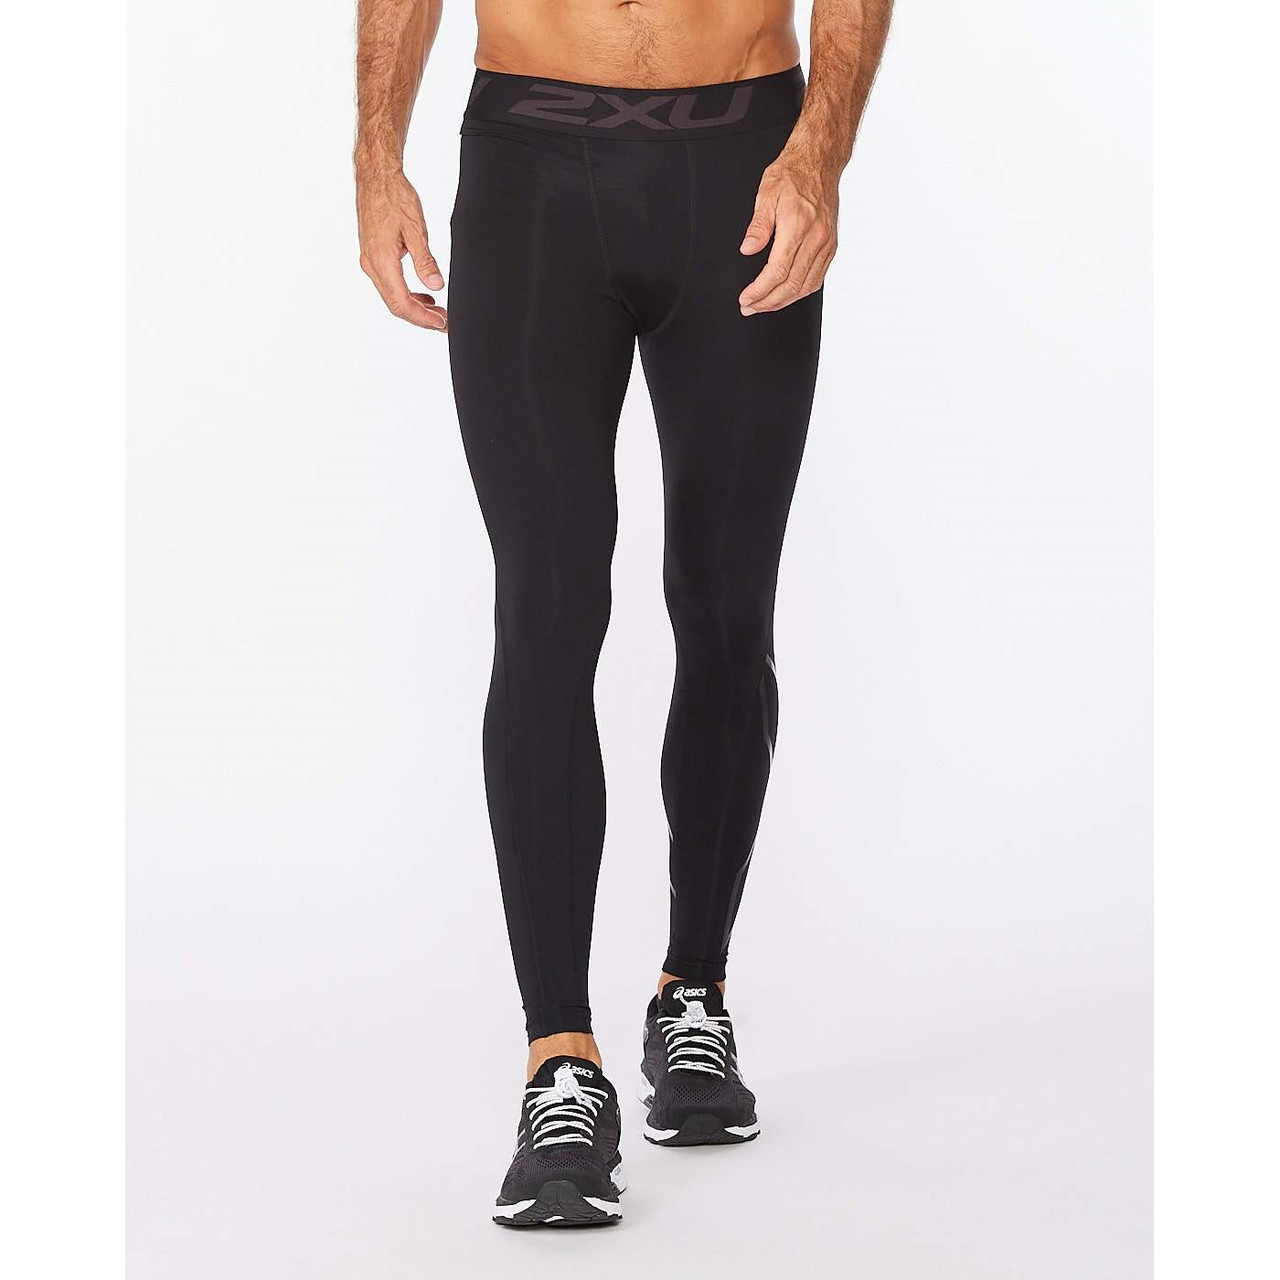 Men's Ignition Tights